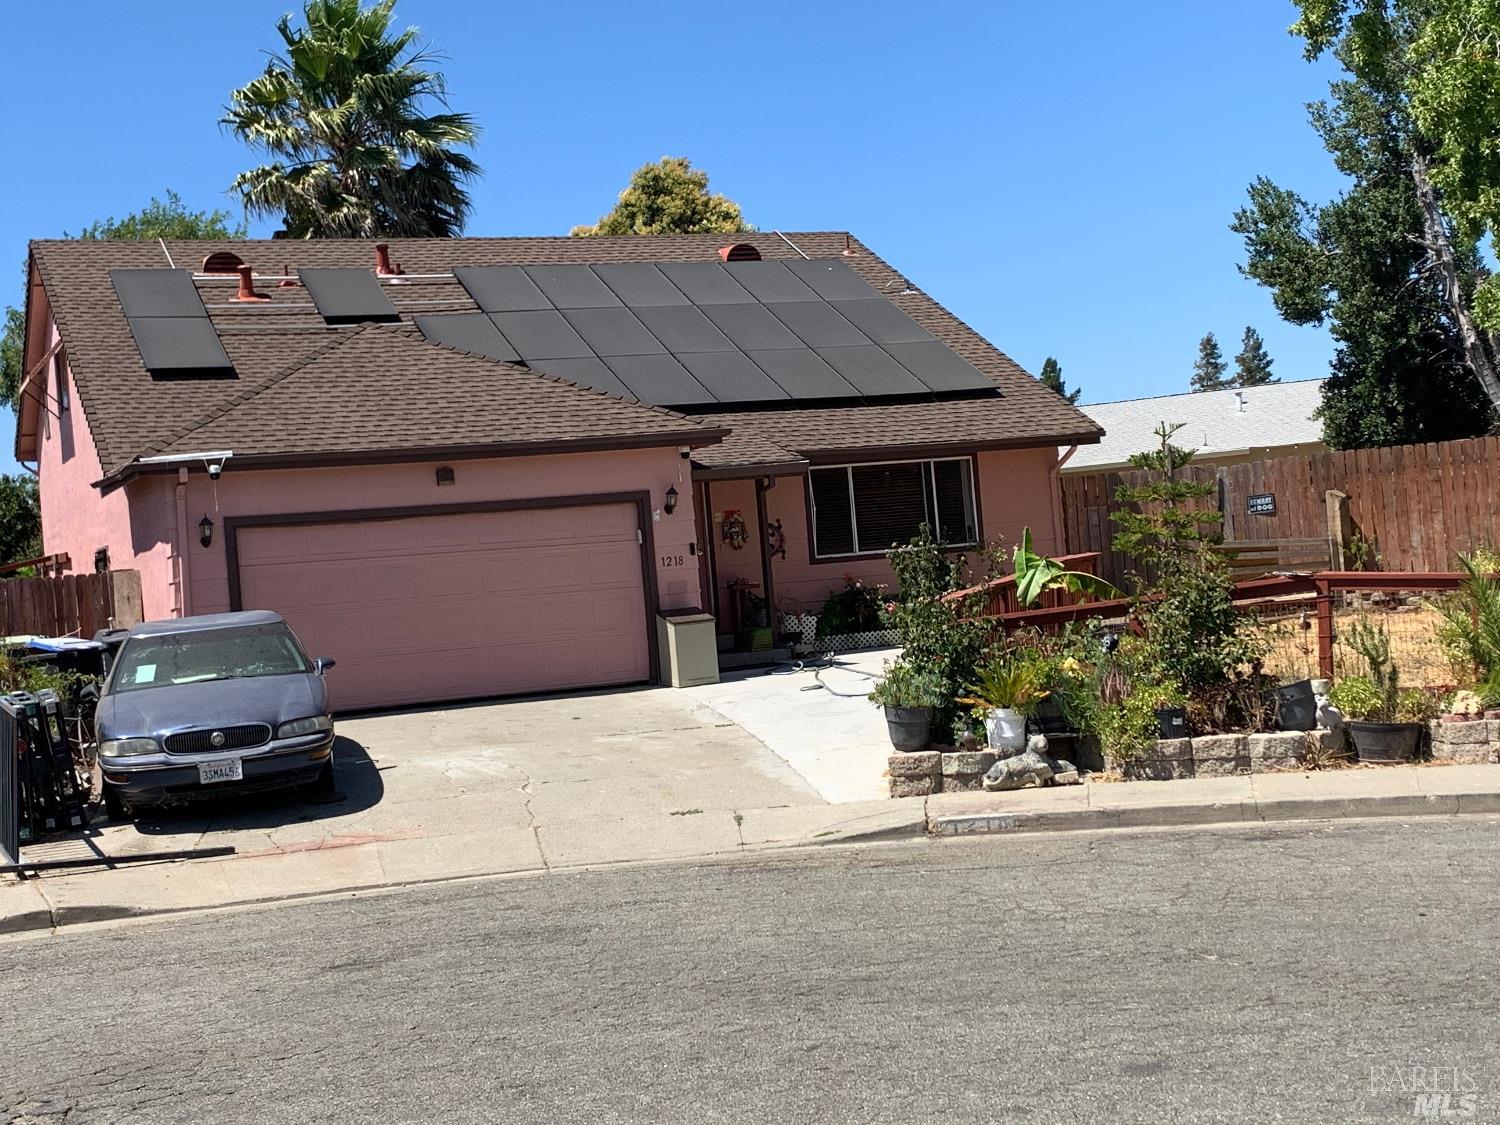 Photo of Address Not Disclosed in Fairfield, CA